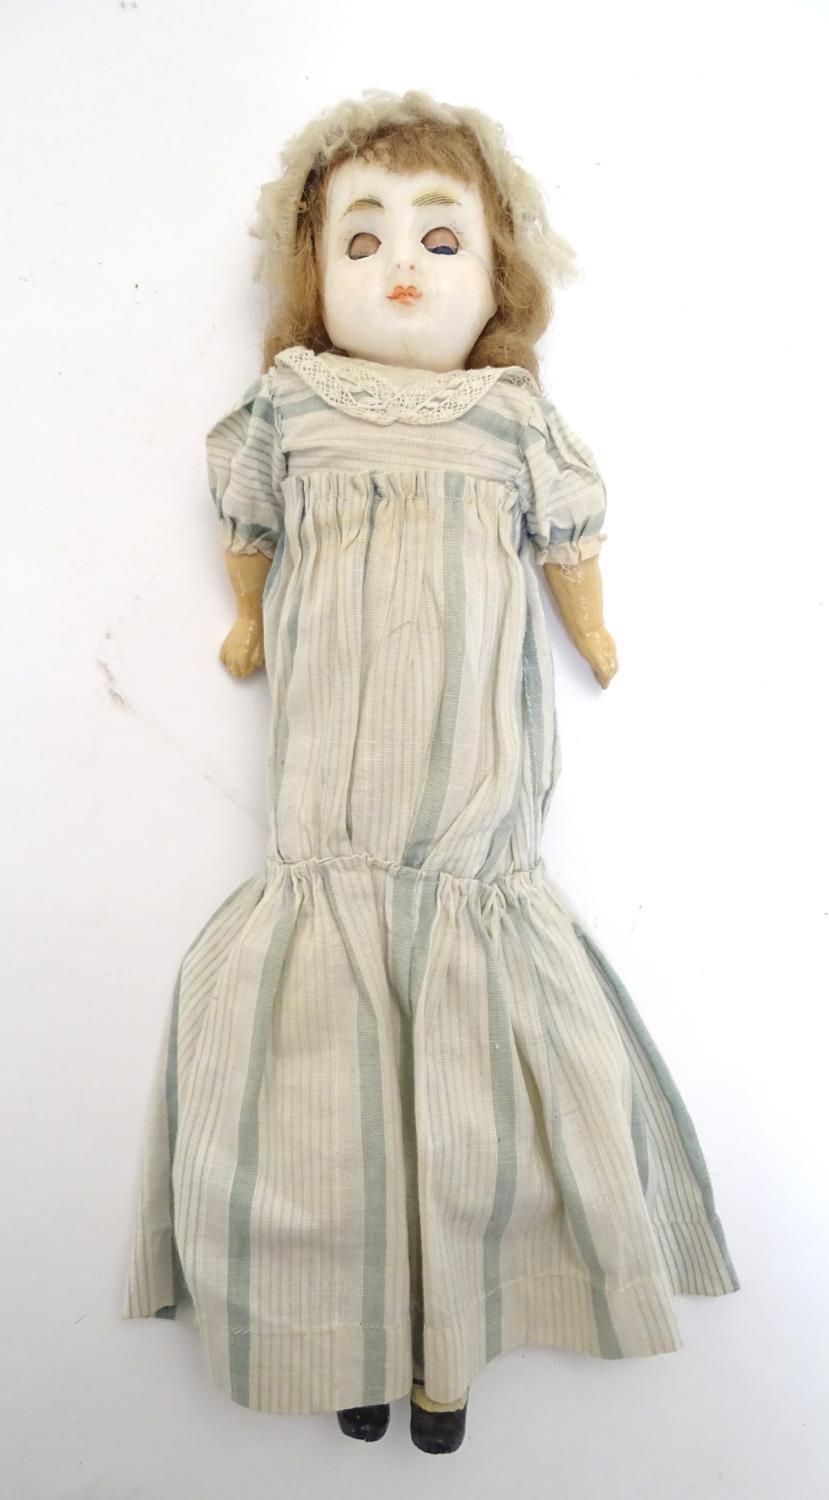 Toy: A wax headed doll with blue eyes, painted features, brown hair, composite forearms and